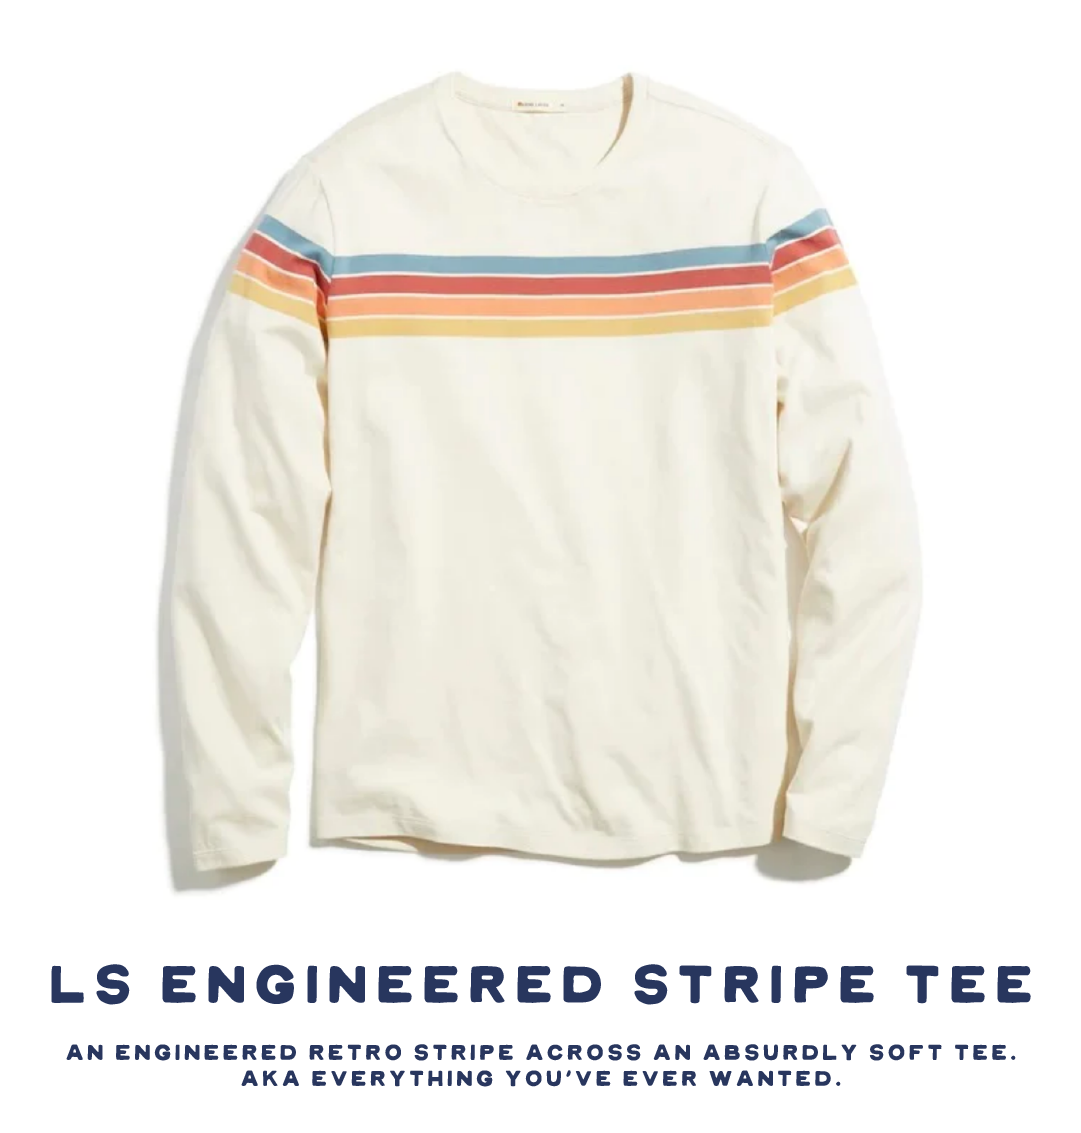  LS ENGINEERED STRIPE TEE AN ENGINEERED RETRO STRIPE ACROSS AN ABSURDLY SOFT TEE. AKA EVERYTHING YOU'VE EVER WANTED. 